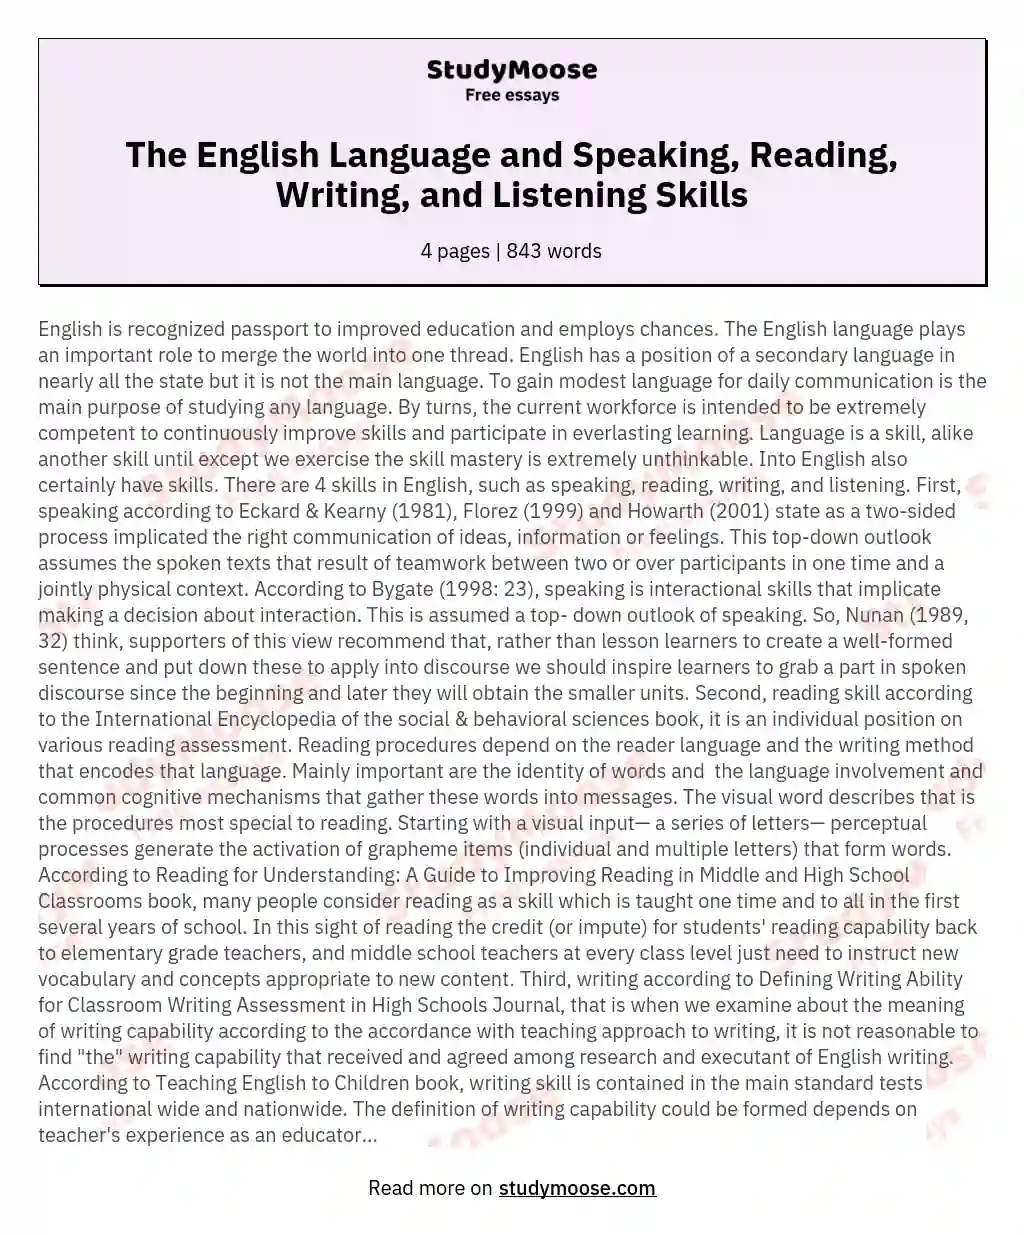 The English Language and Speaking, Reading, Writing, and Listening Skills essay